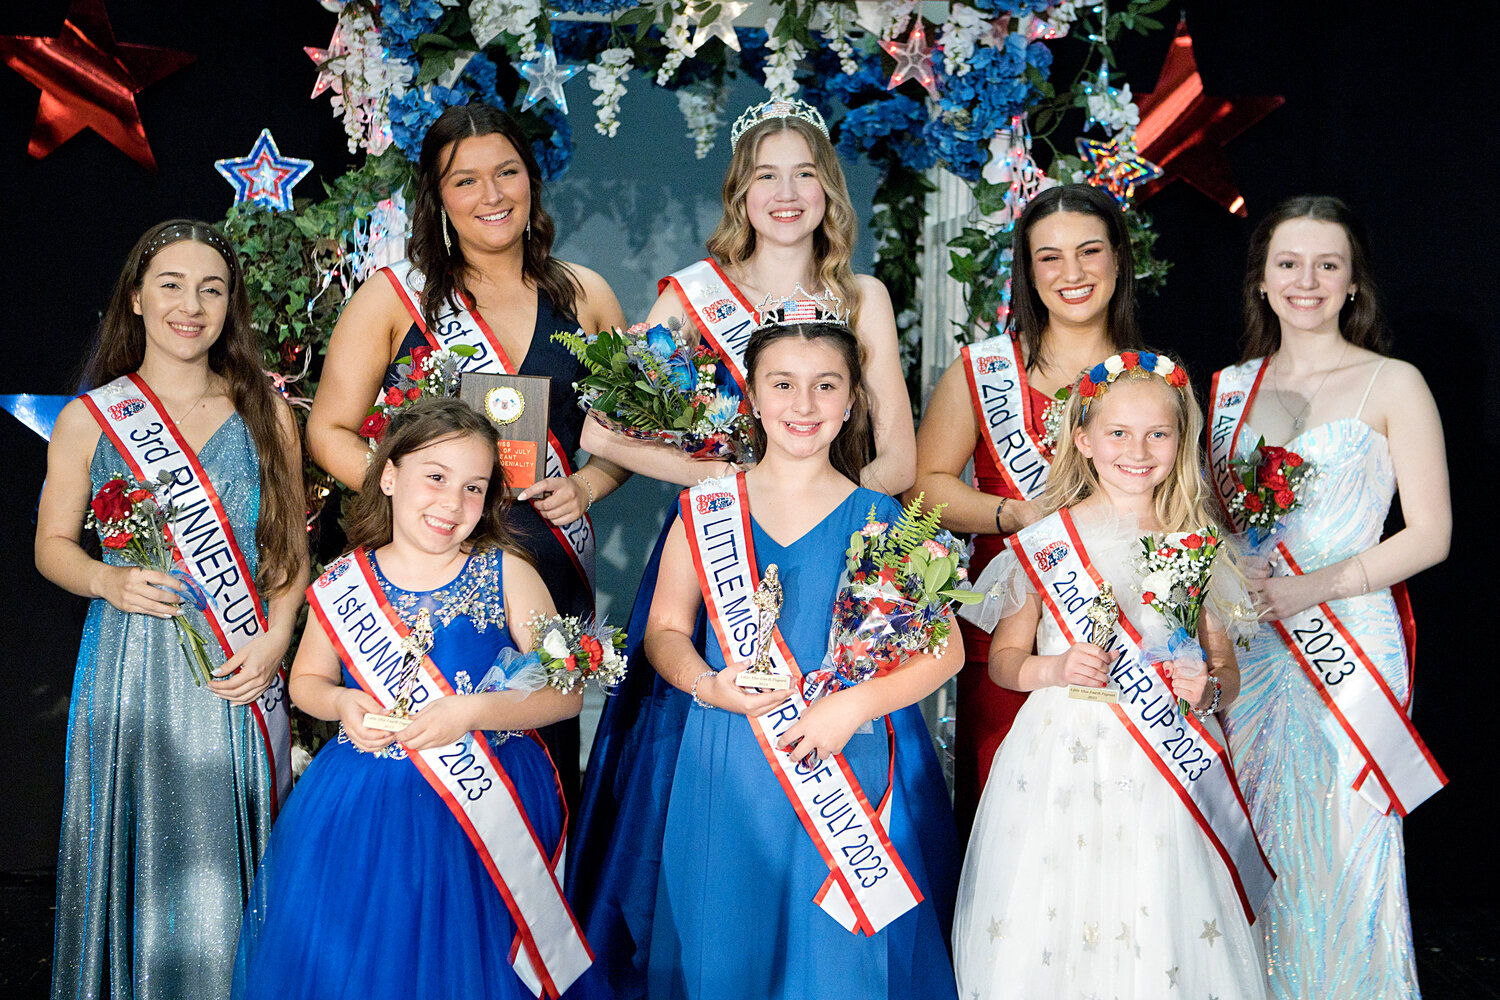 Winners in the 75th Miss Fourth of July Pageant include (back row, left to right) third runner-up Beilah Teixeira, first runner-up and Miss Congeniality Mia Padula, Miss Fourth of July Casey Little, second runner-up Sophia Ferolito and fourth runner-up Skyla Silvia; and (front row) first runner-up Bryn Correia, Little Miss Fourth of July Charlotte Loftus and second runner-up Avery Hicks.